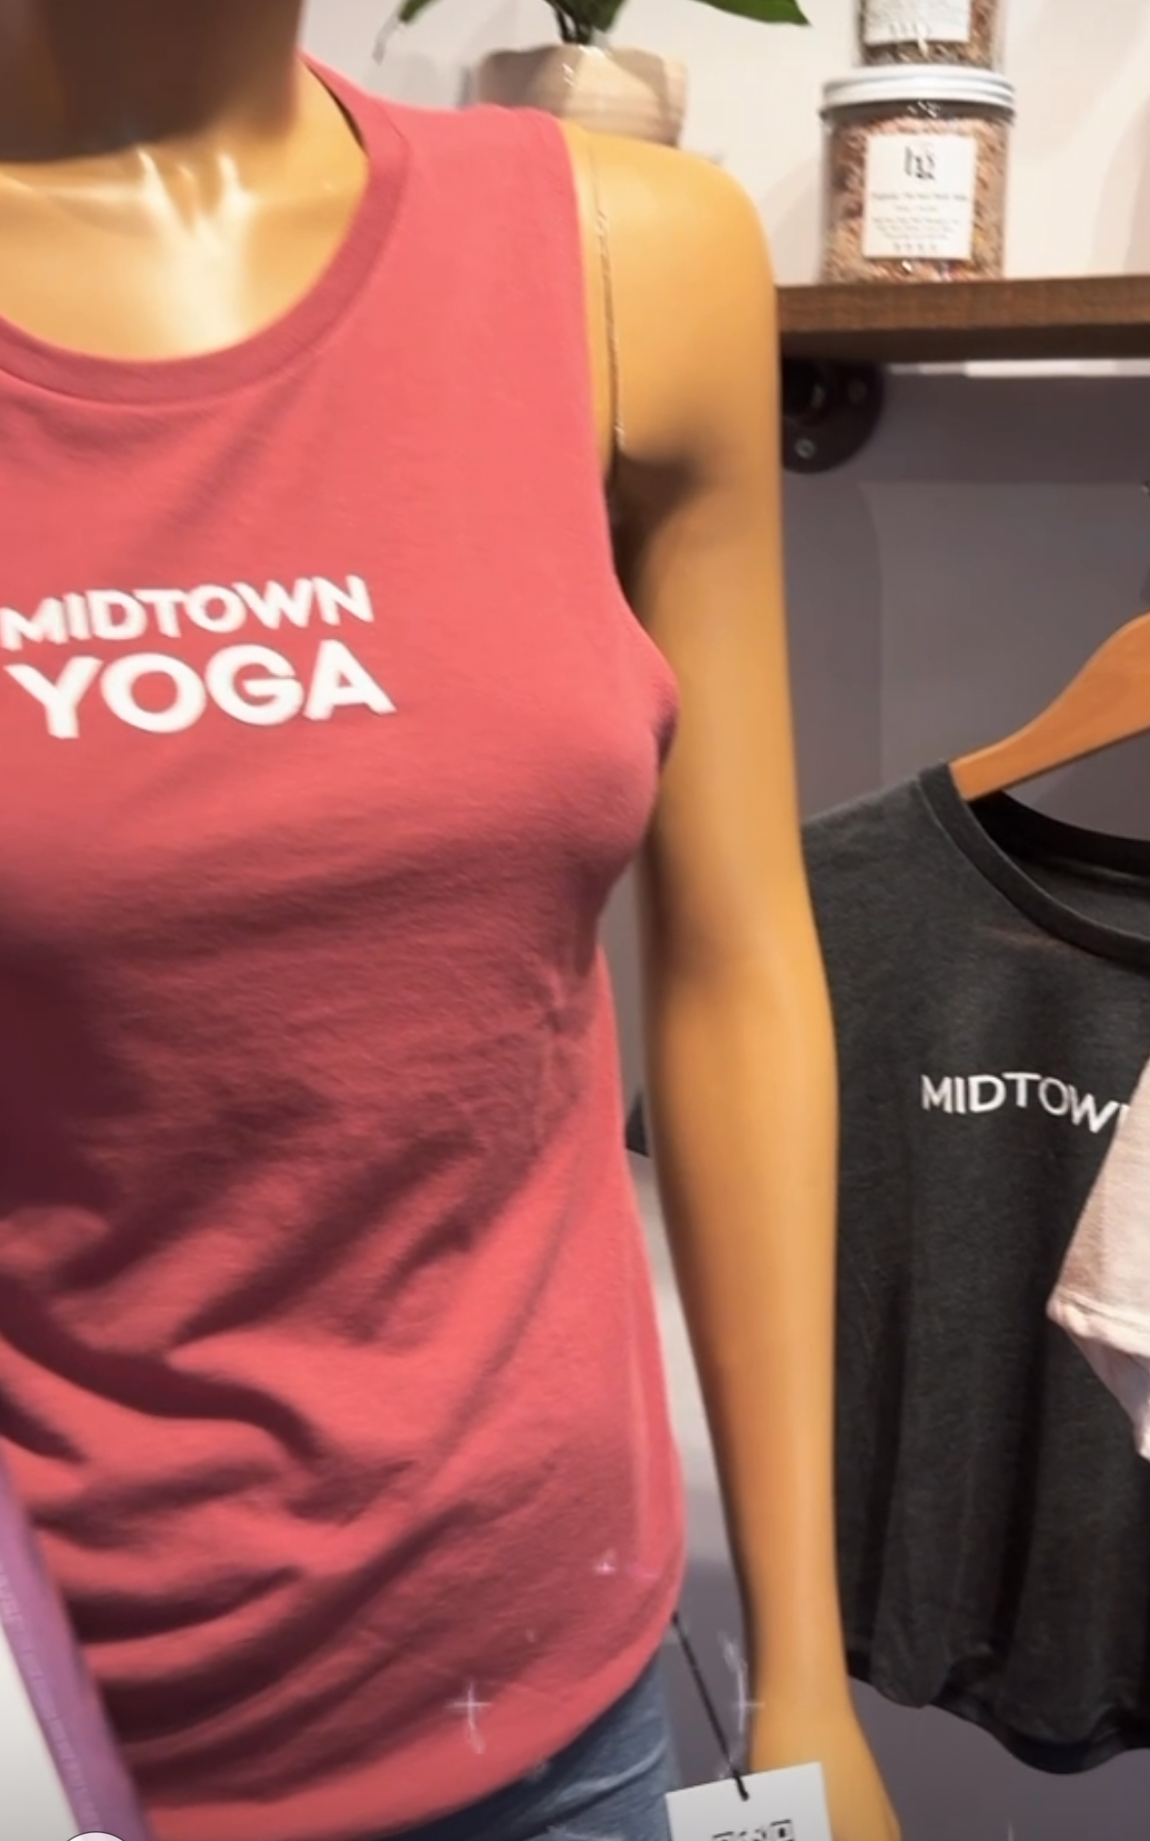 Midtown Yoga- Tops, Crops and T-Shirts